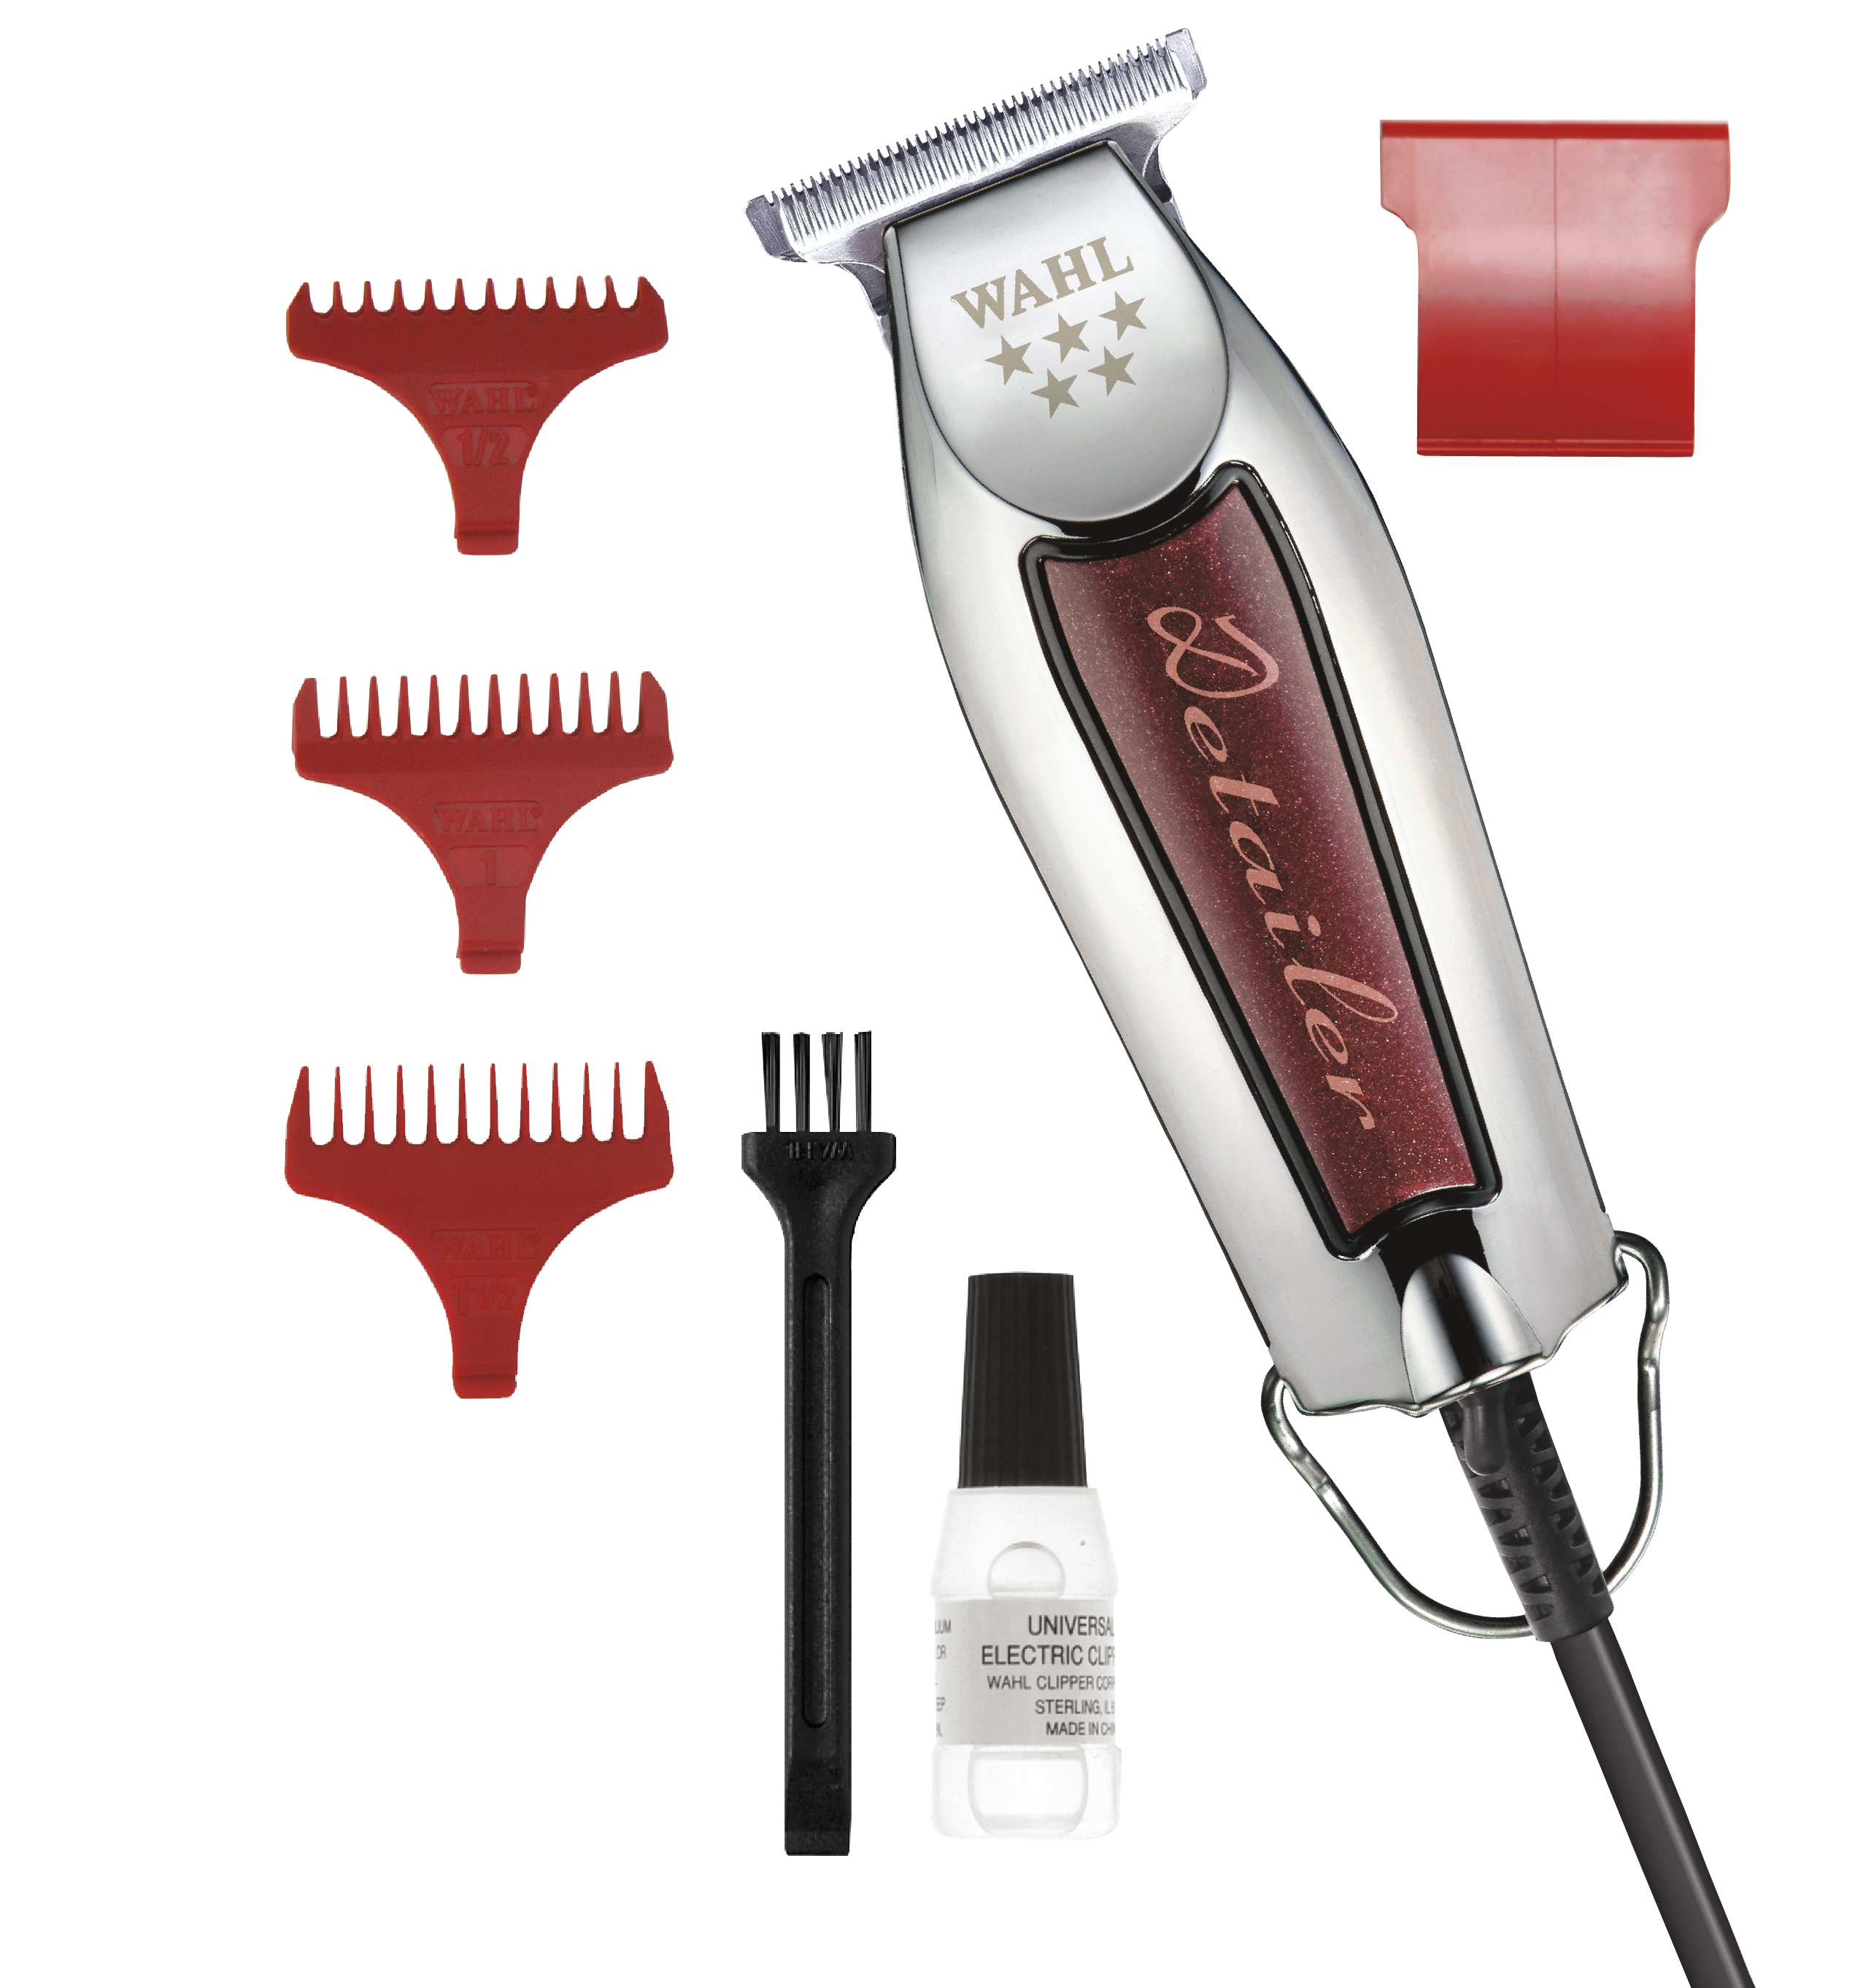 wahl lithium ion pro clippers